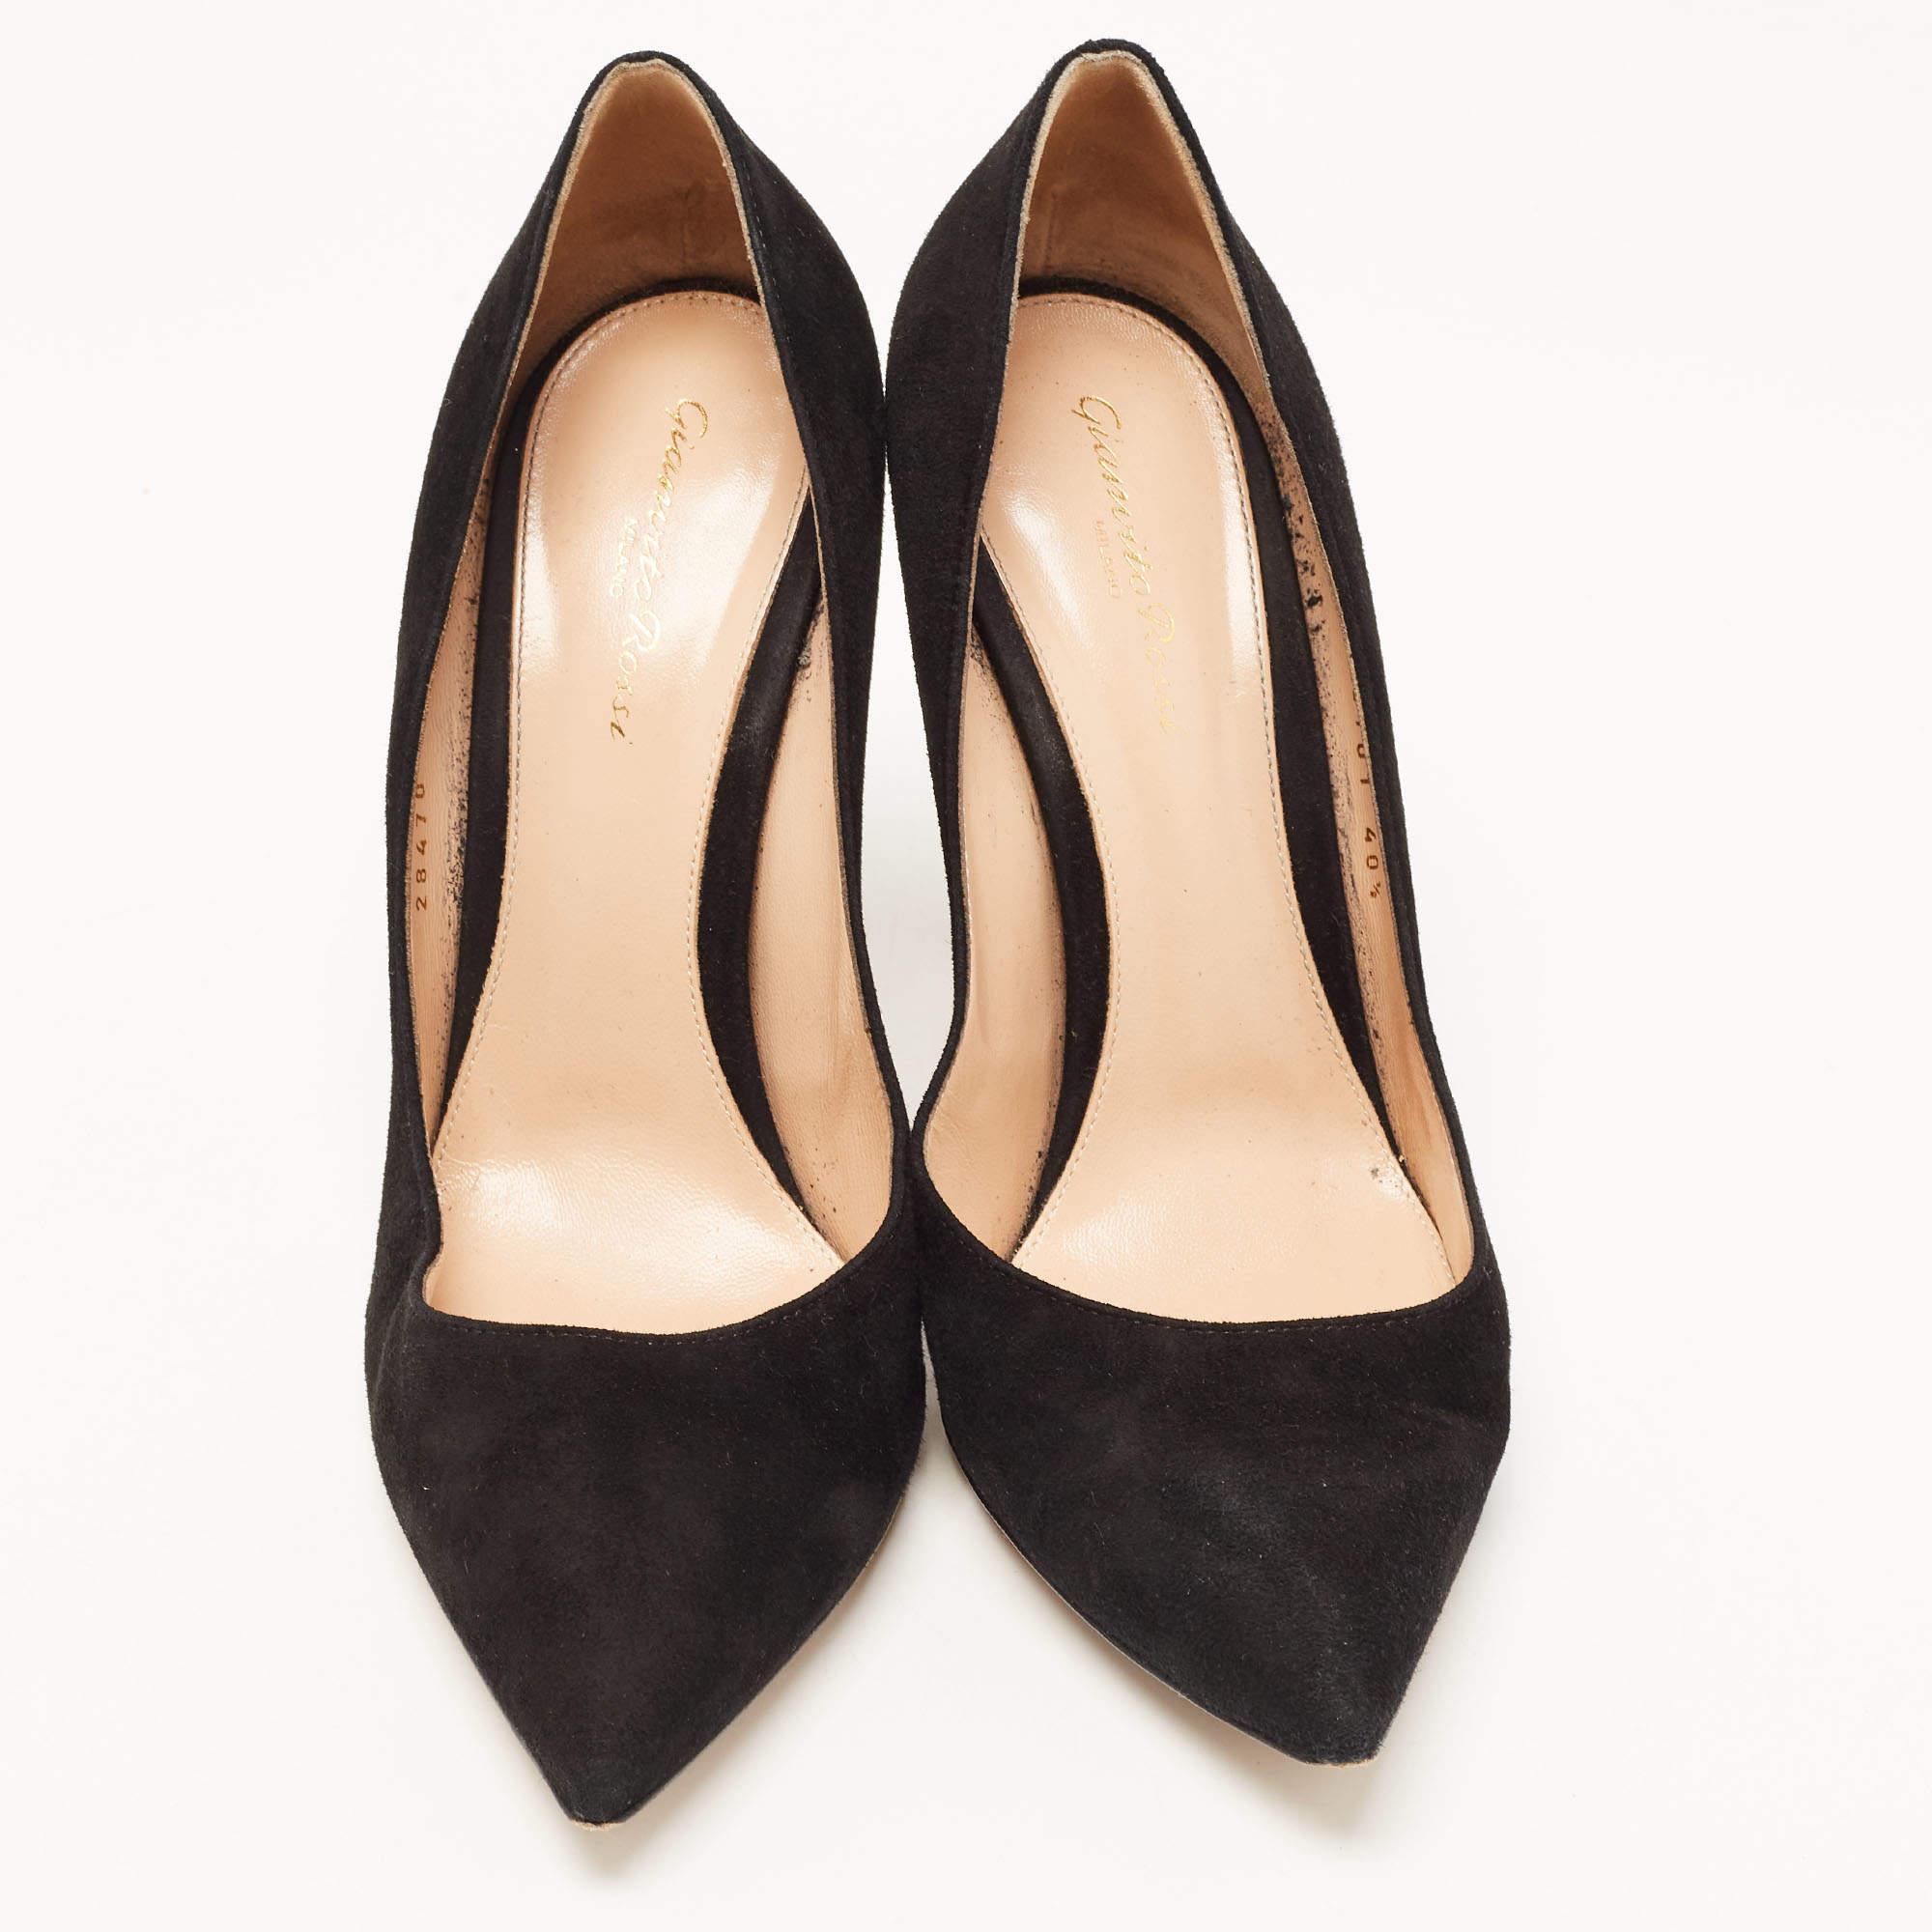 Make a chic style statement with these designer pumps. They showcase sturdy heels and durable soles, perfect for your fashionable outings!

Includes: Original Dustbag

